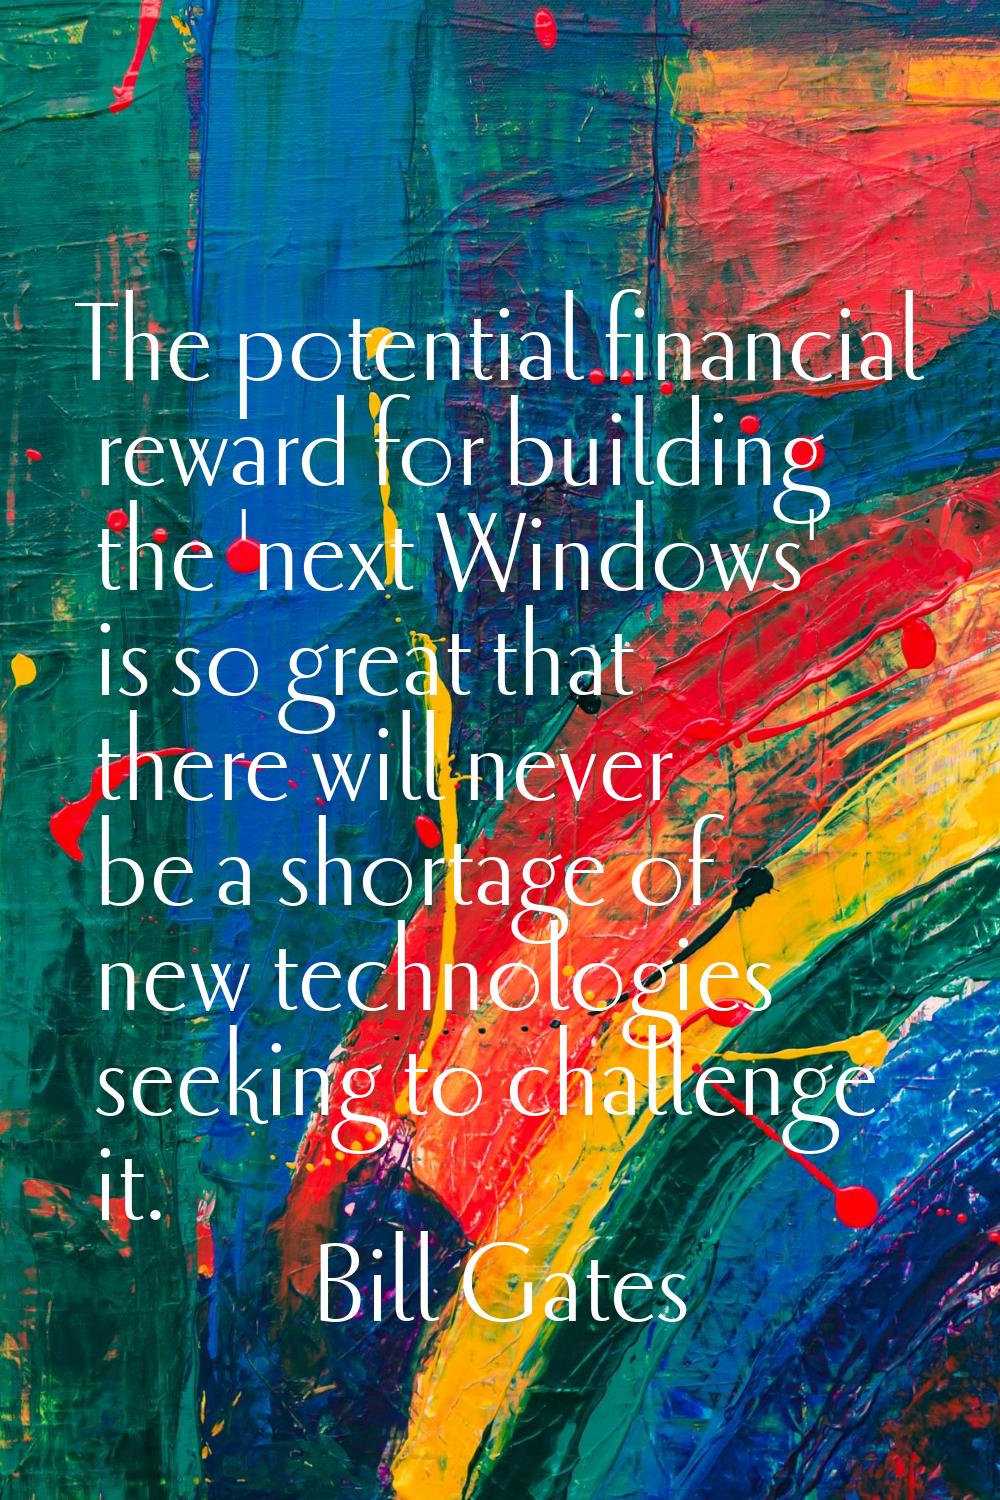 The potential financial reward for building the 'next Windows' is so great that there will never be